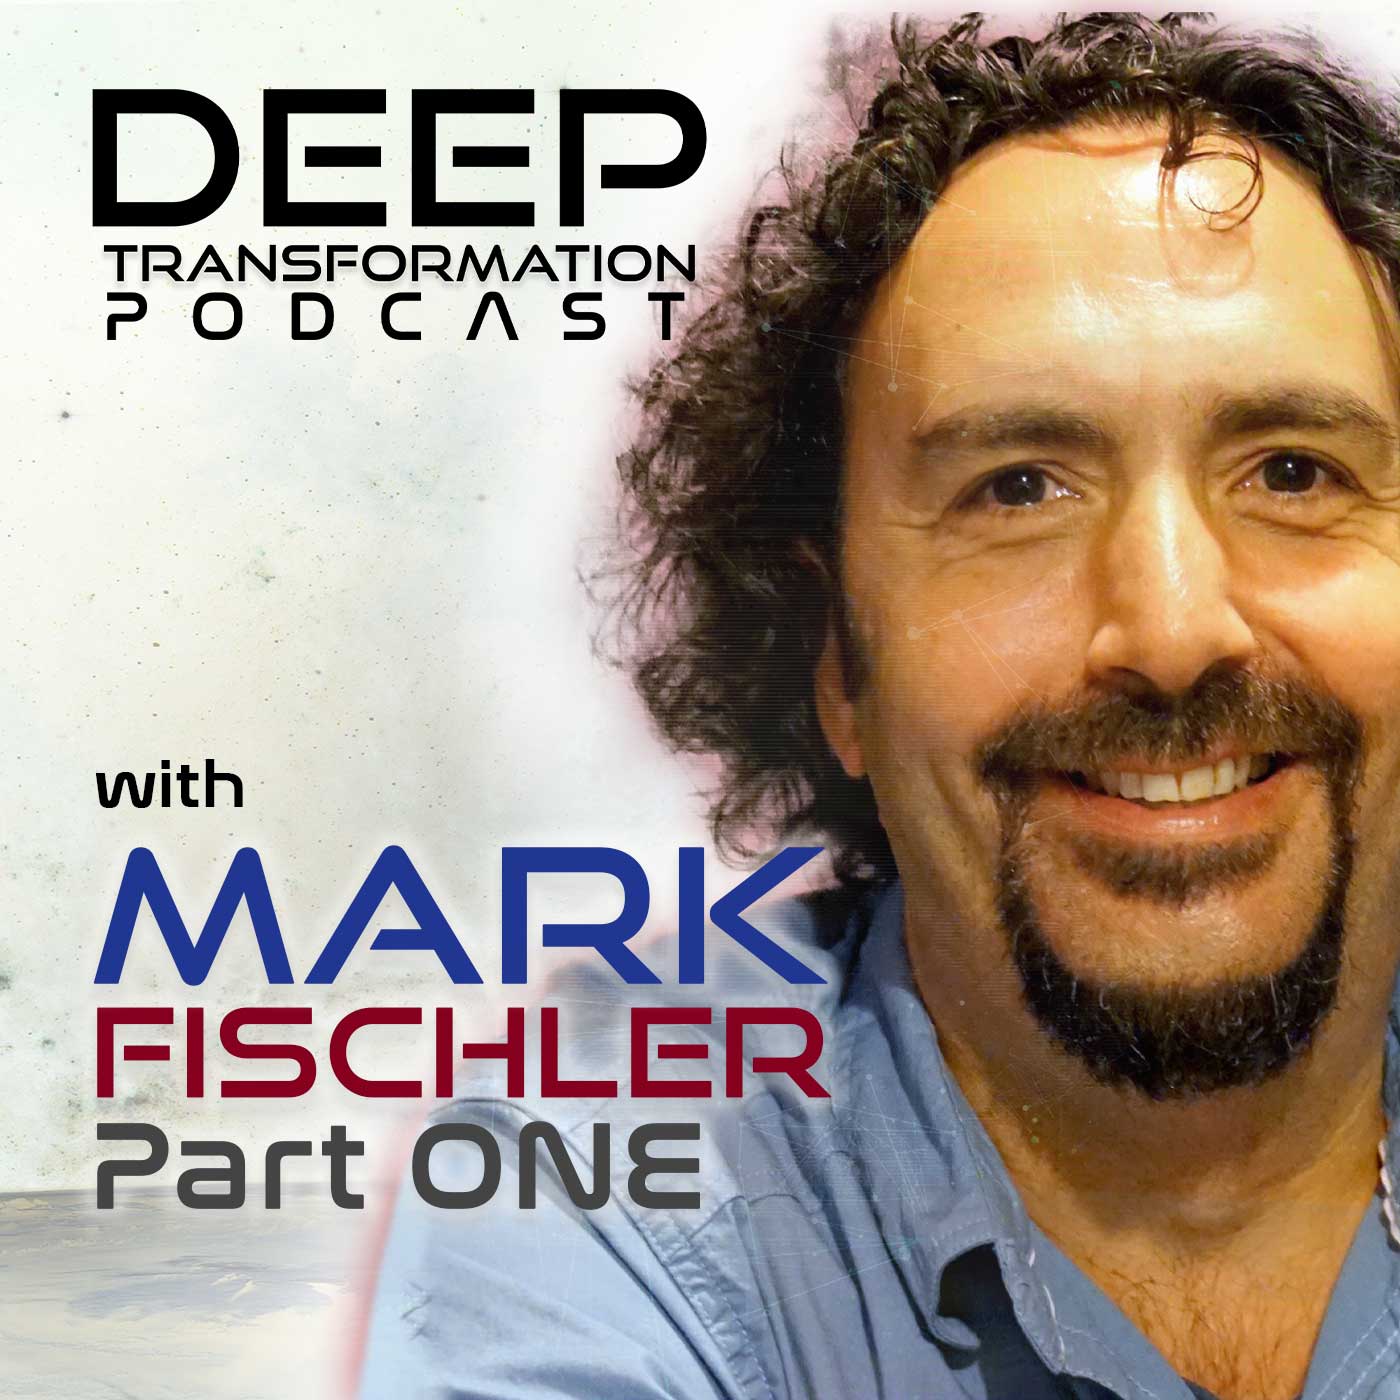 Mark Fischler (Part 1) – Building a Just World: How Our Laws Express Our Collective Values, and the Challenge of Uplifting Our Values, Law, and Society